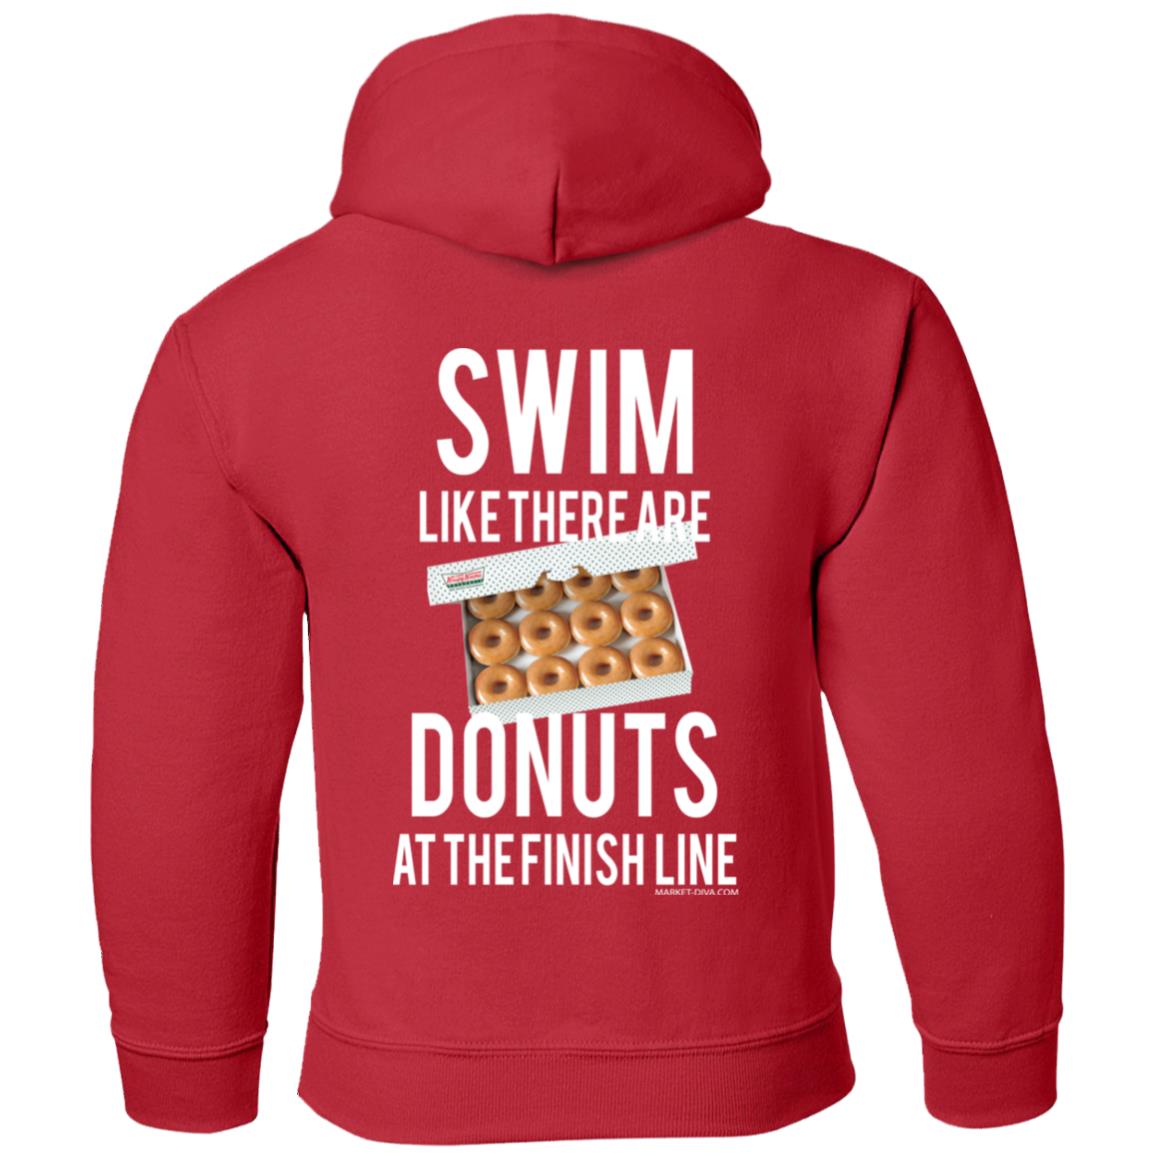 Hoodie: Donuts at Finish Line - Youth